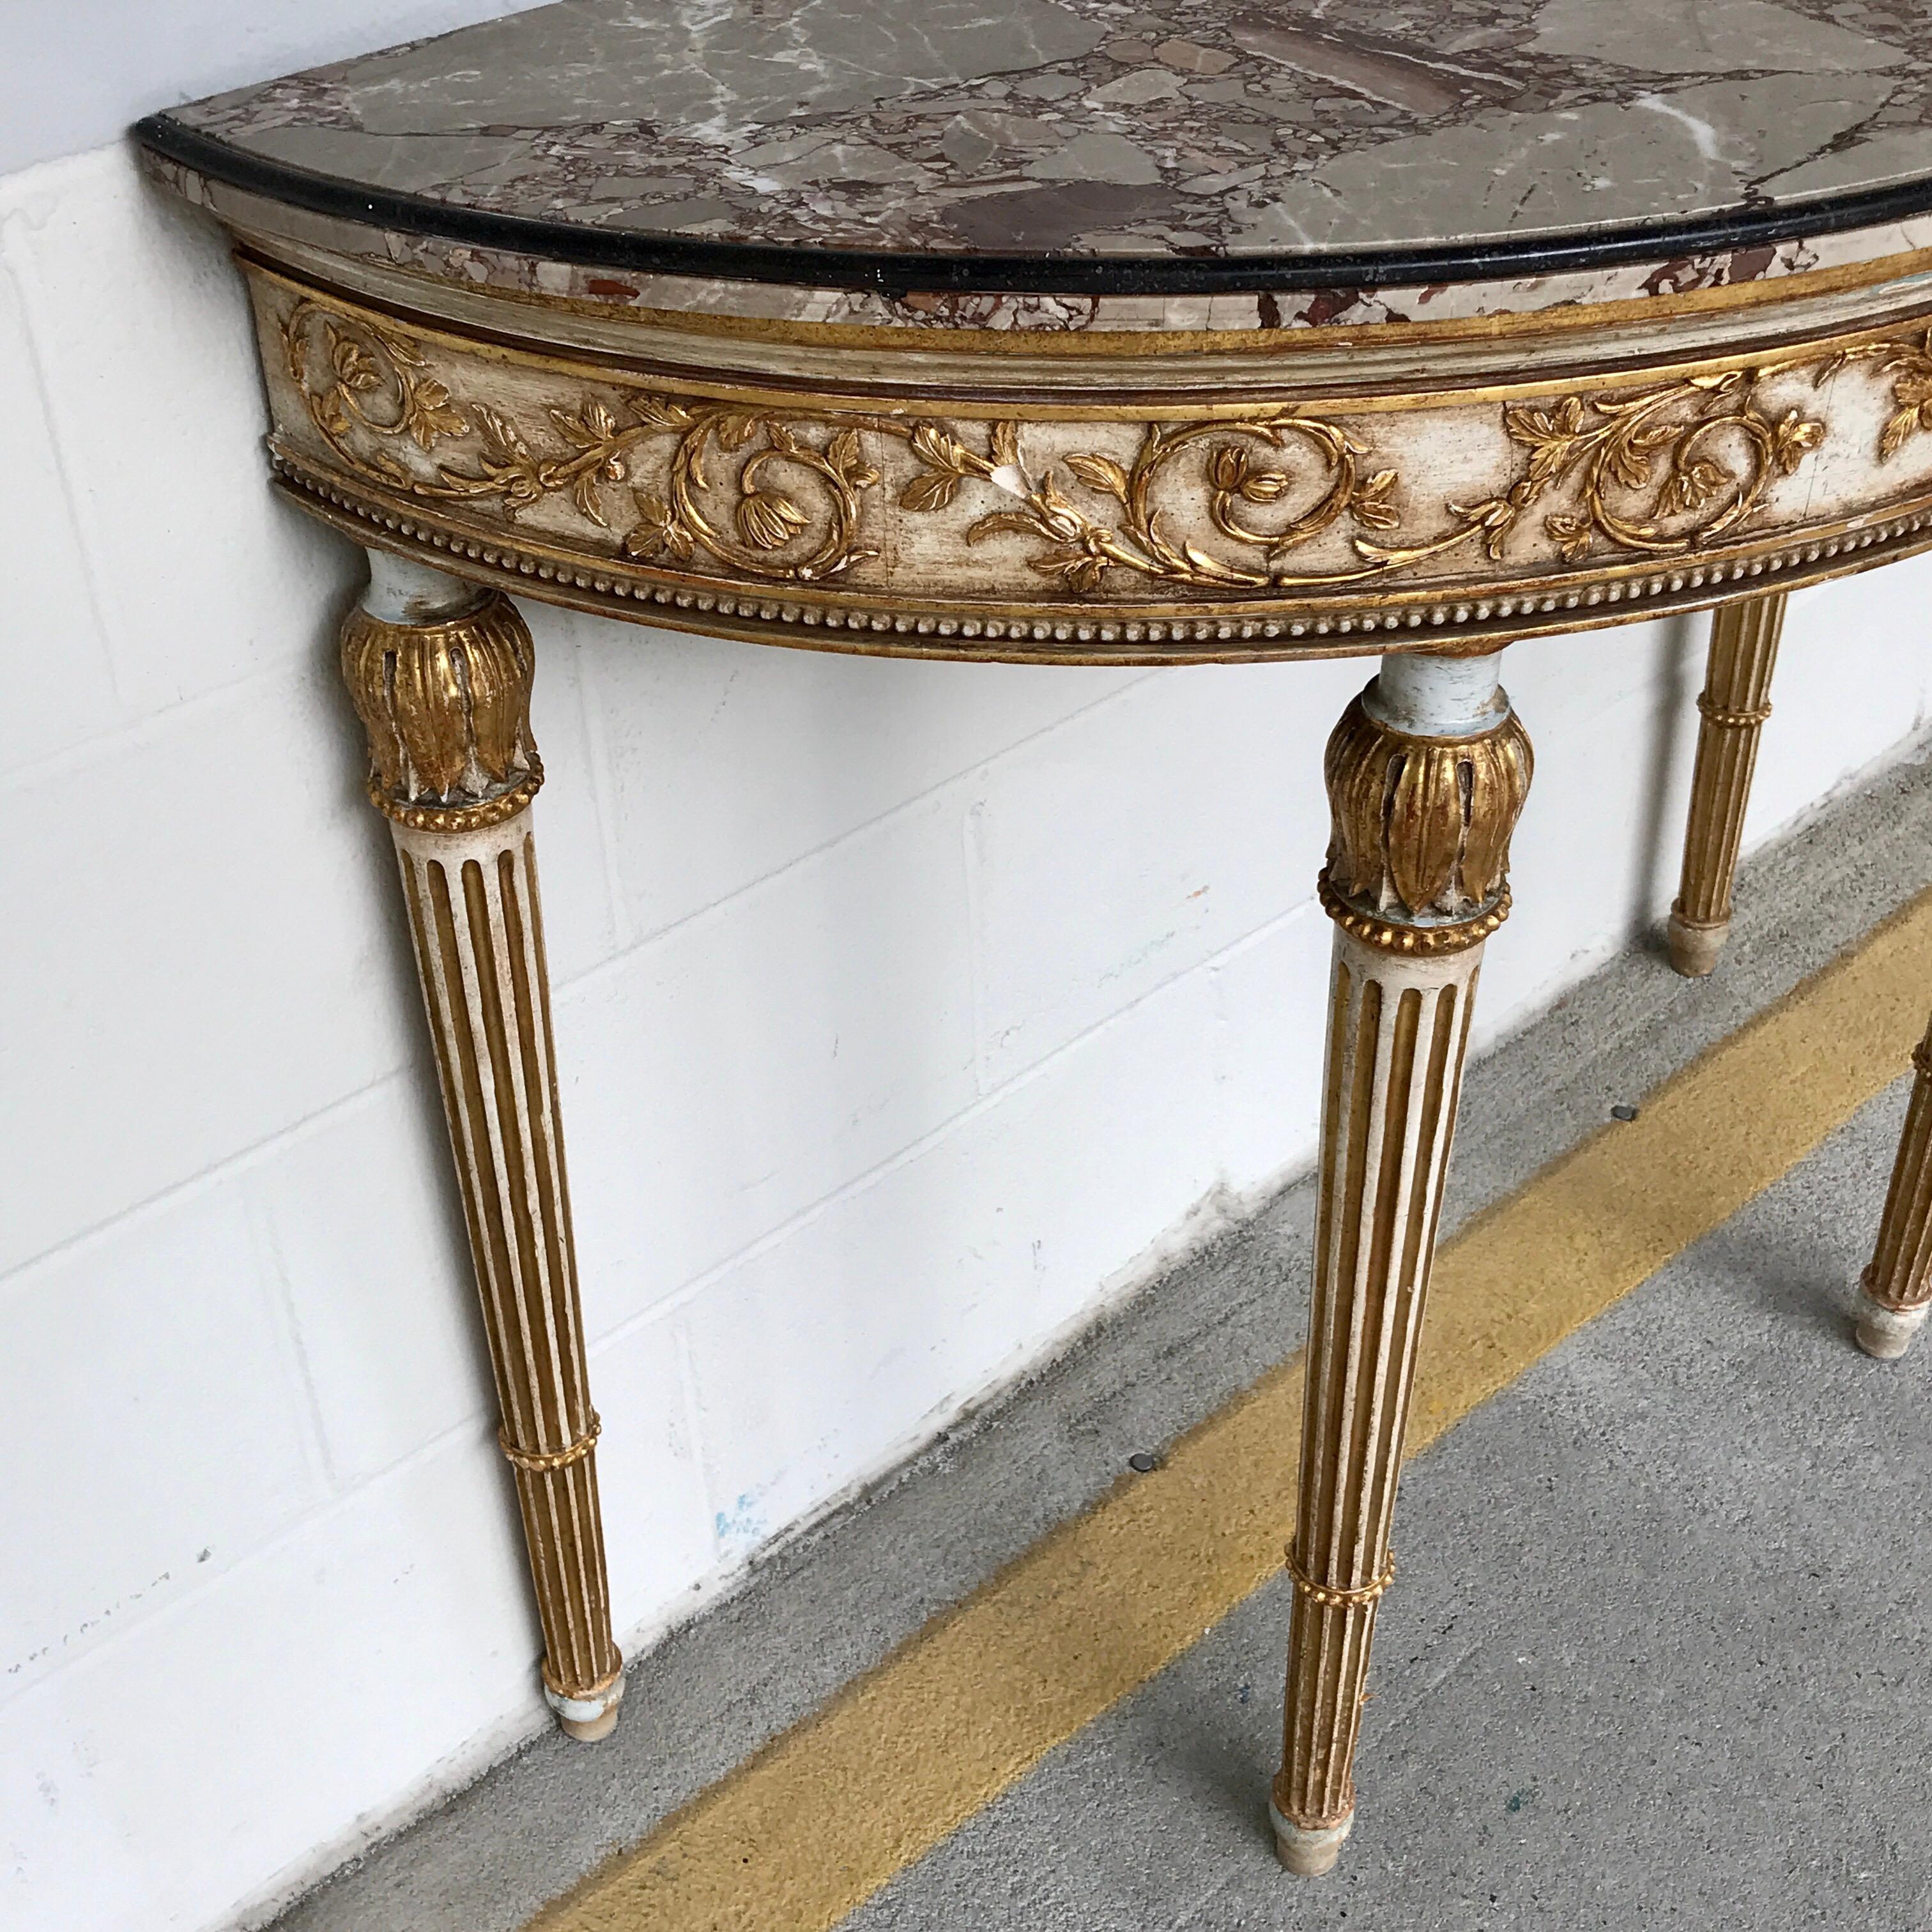 20th Century Italian Neoclassical Parcel Gilt Marble Top Console